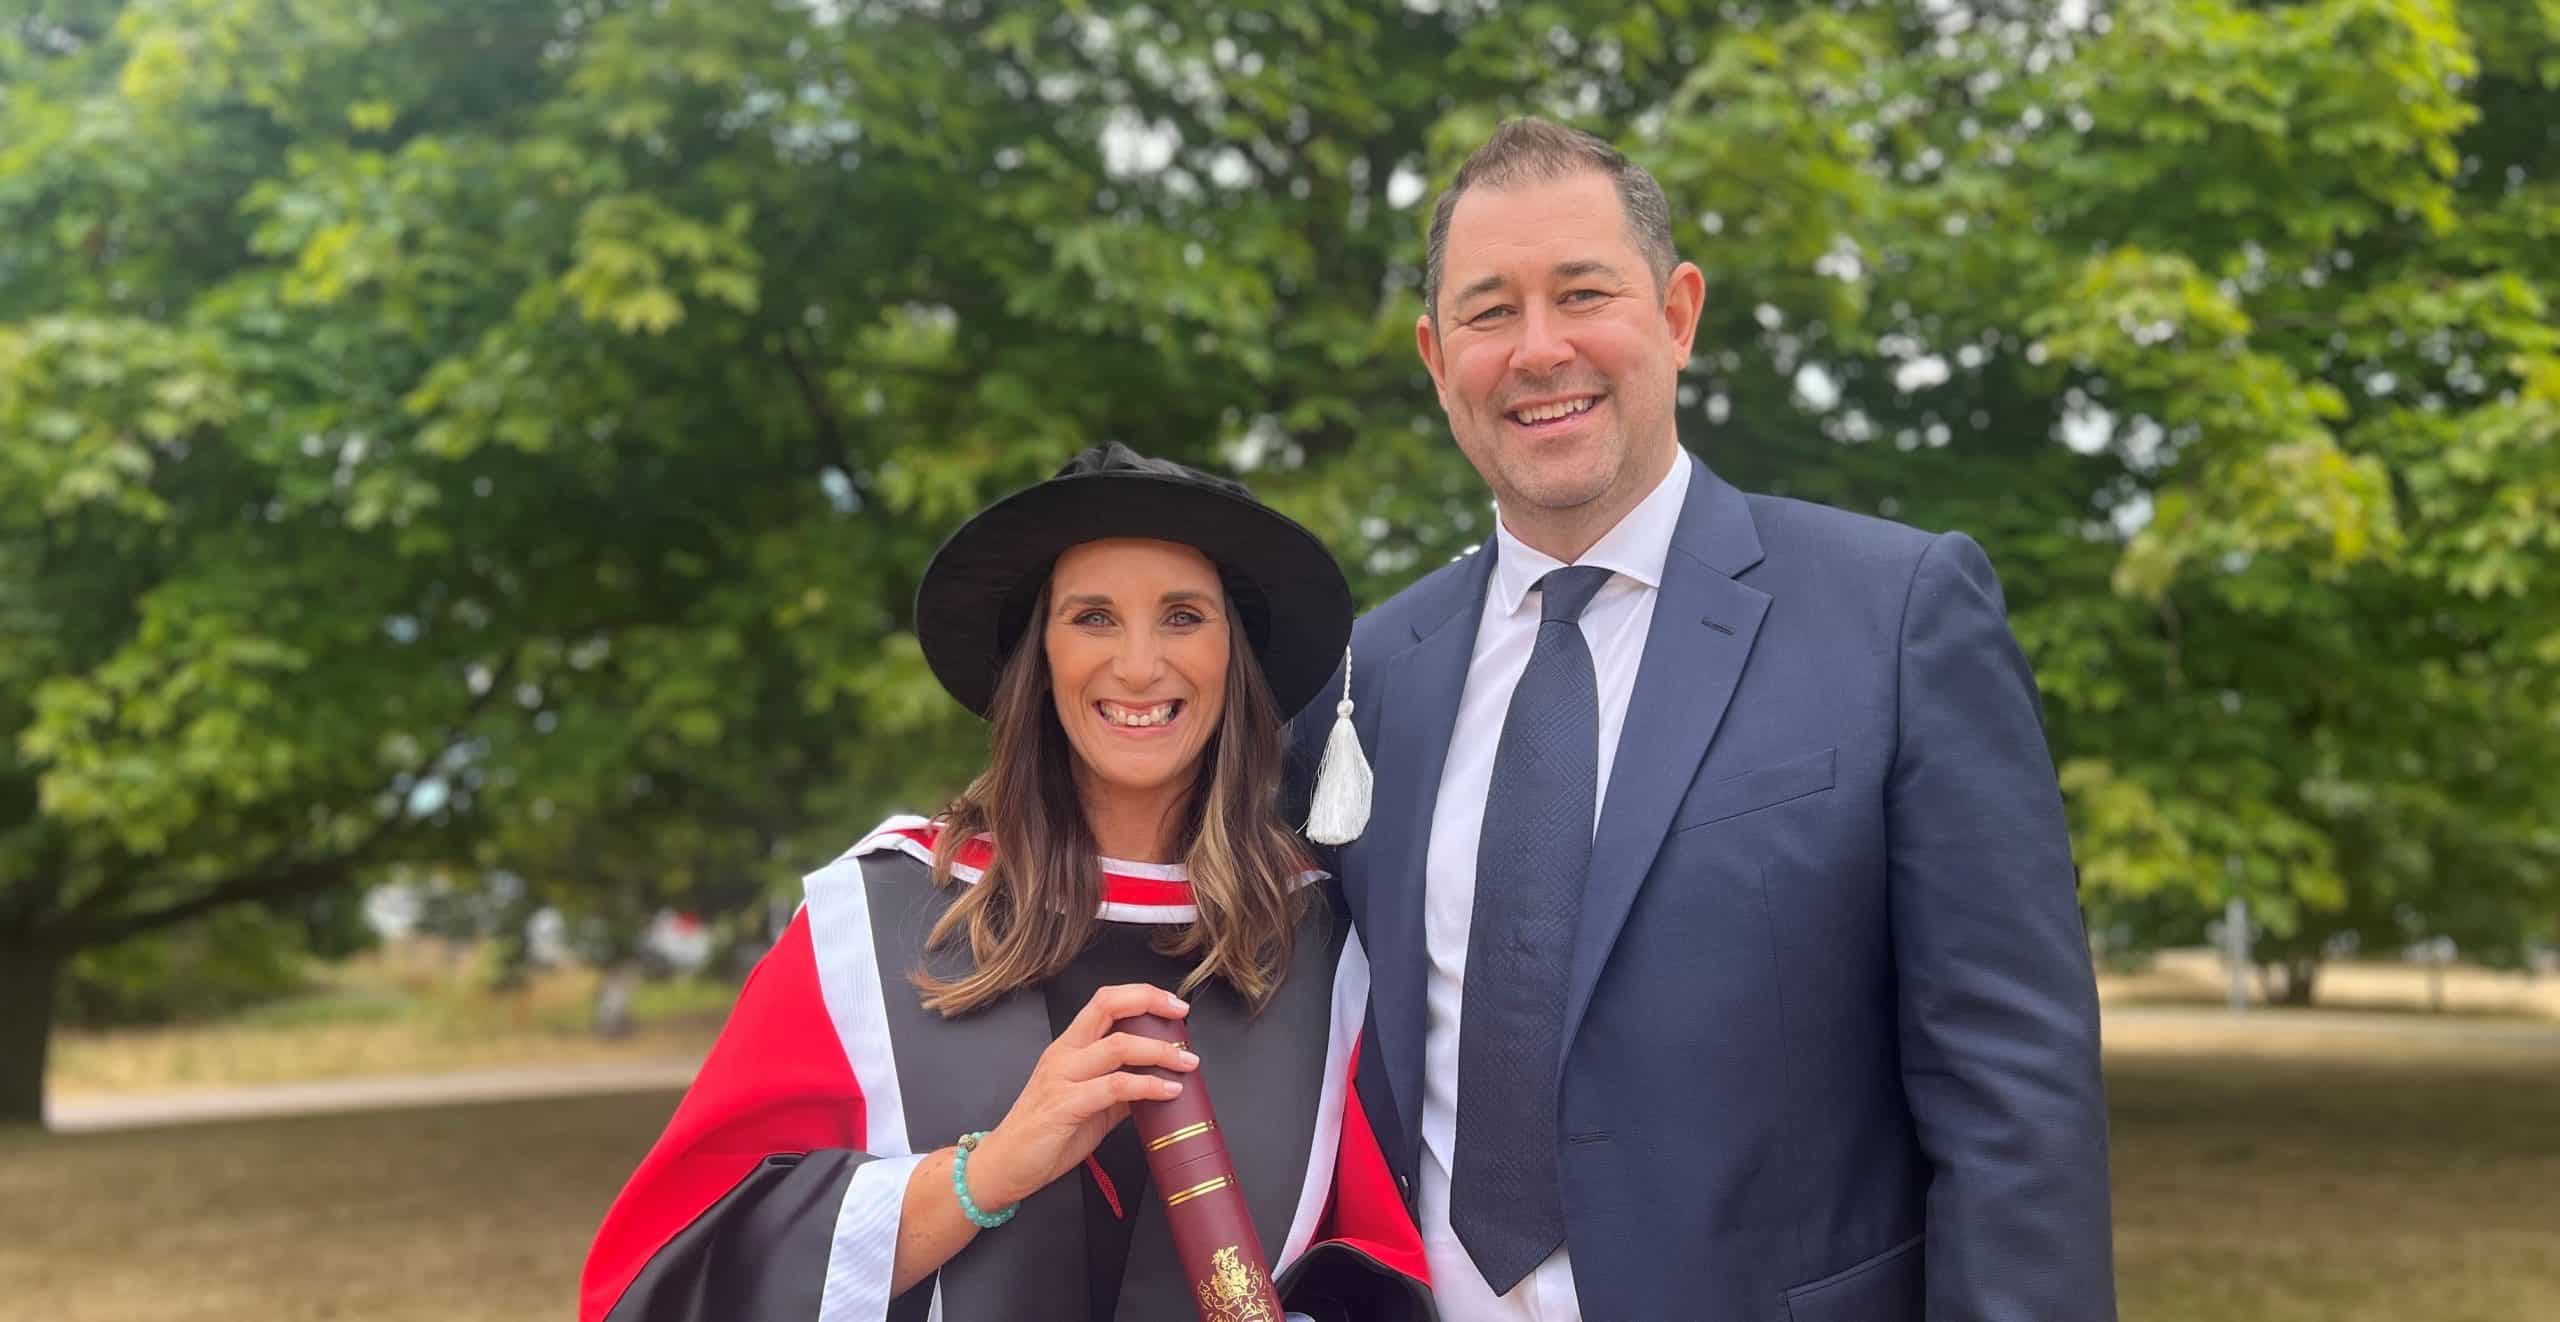 EHAAT CEO Jane Gurney receives honorary degree from University of Essex